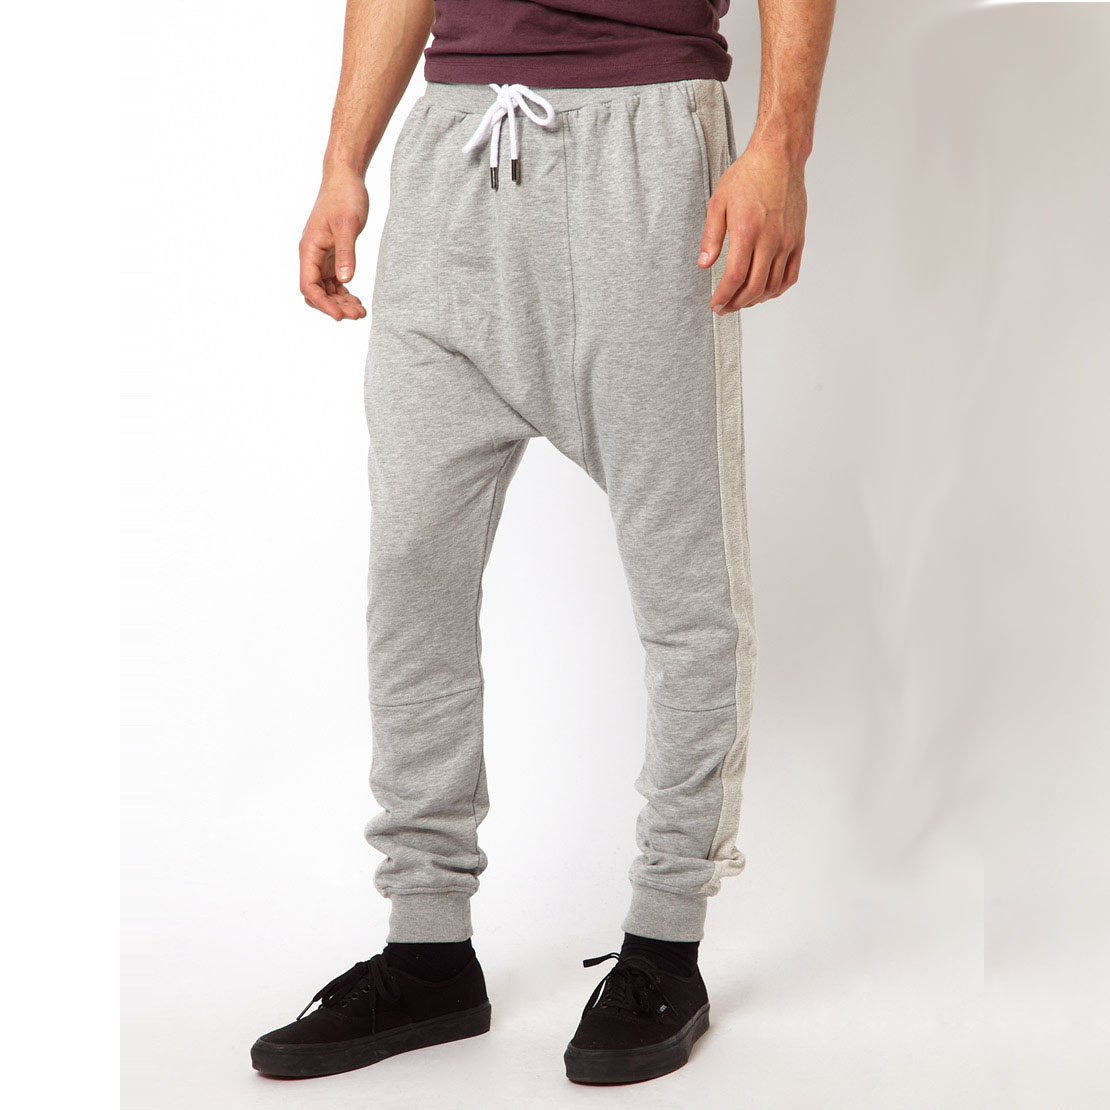 Baggy pants men have made a stylish comeback, offering both comfort and versatility in modern fashion. However, mastering